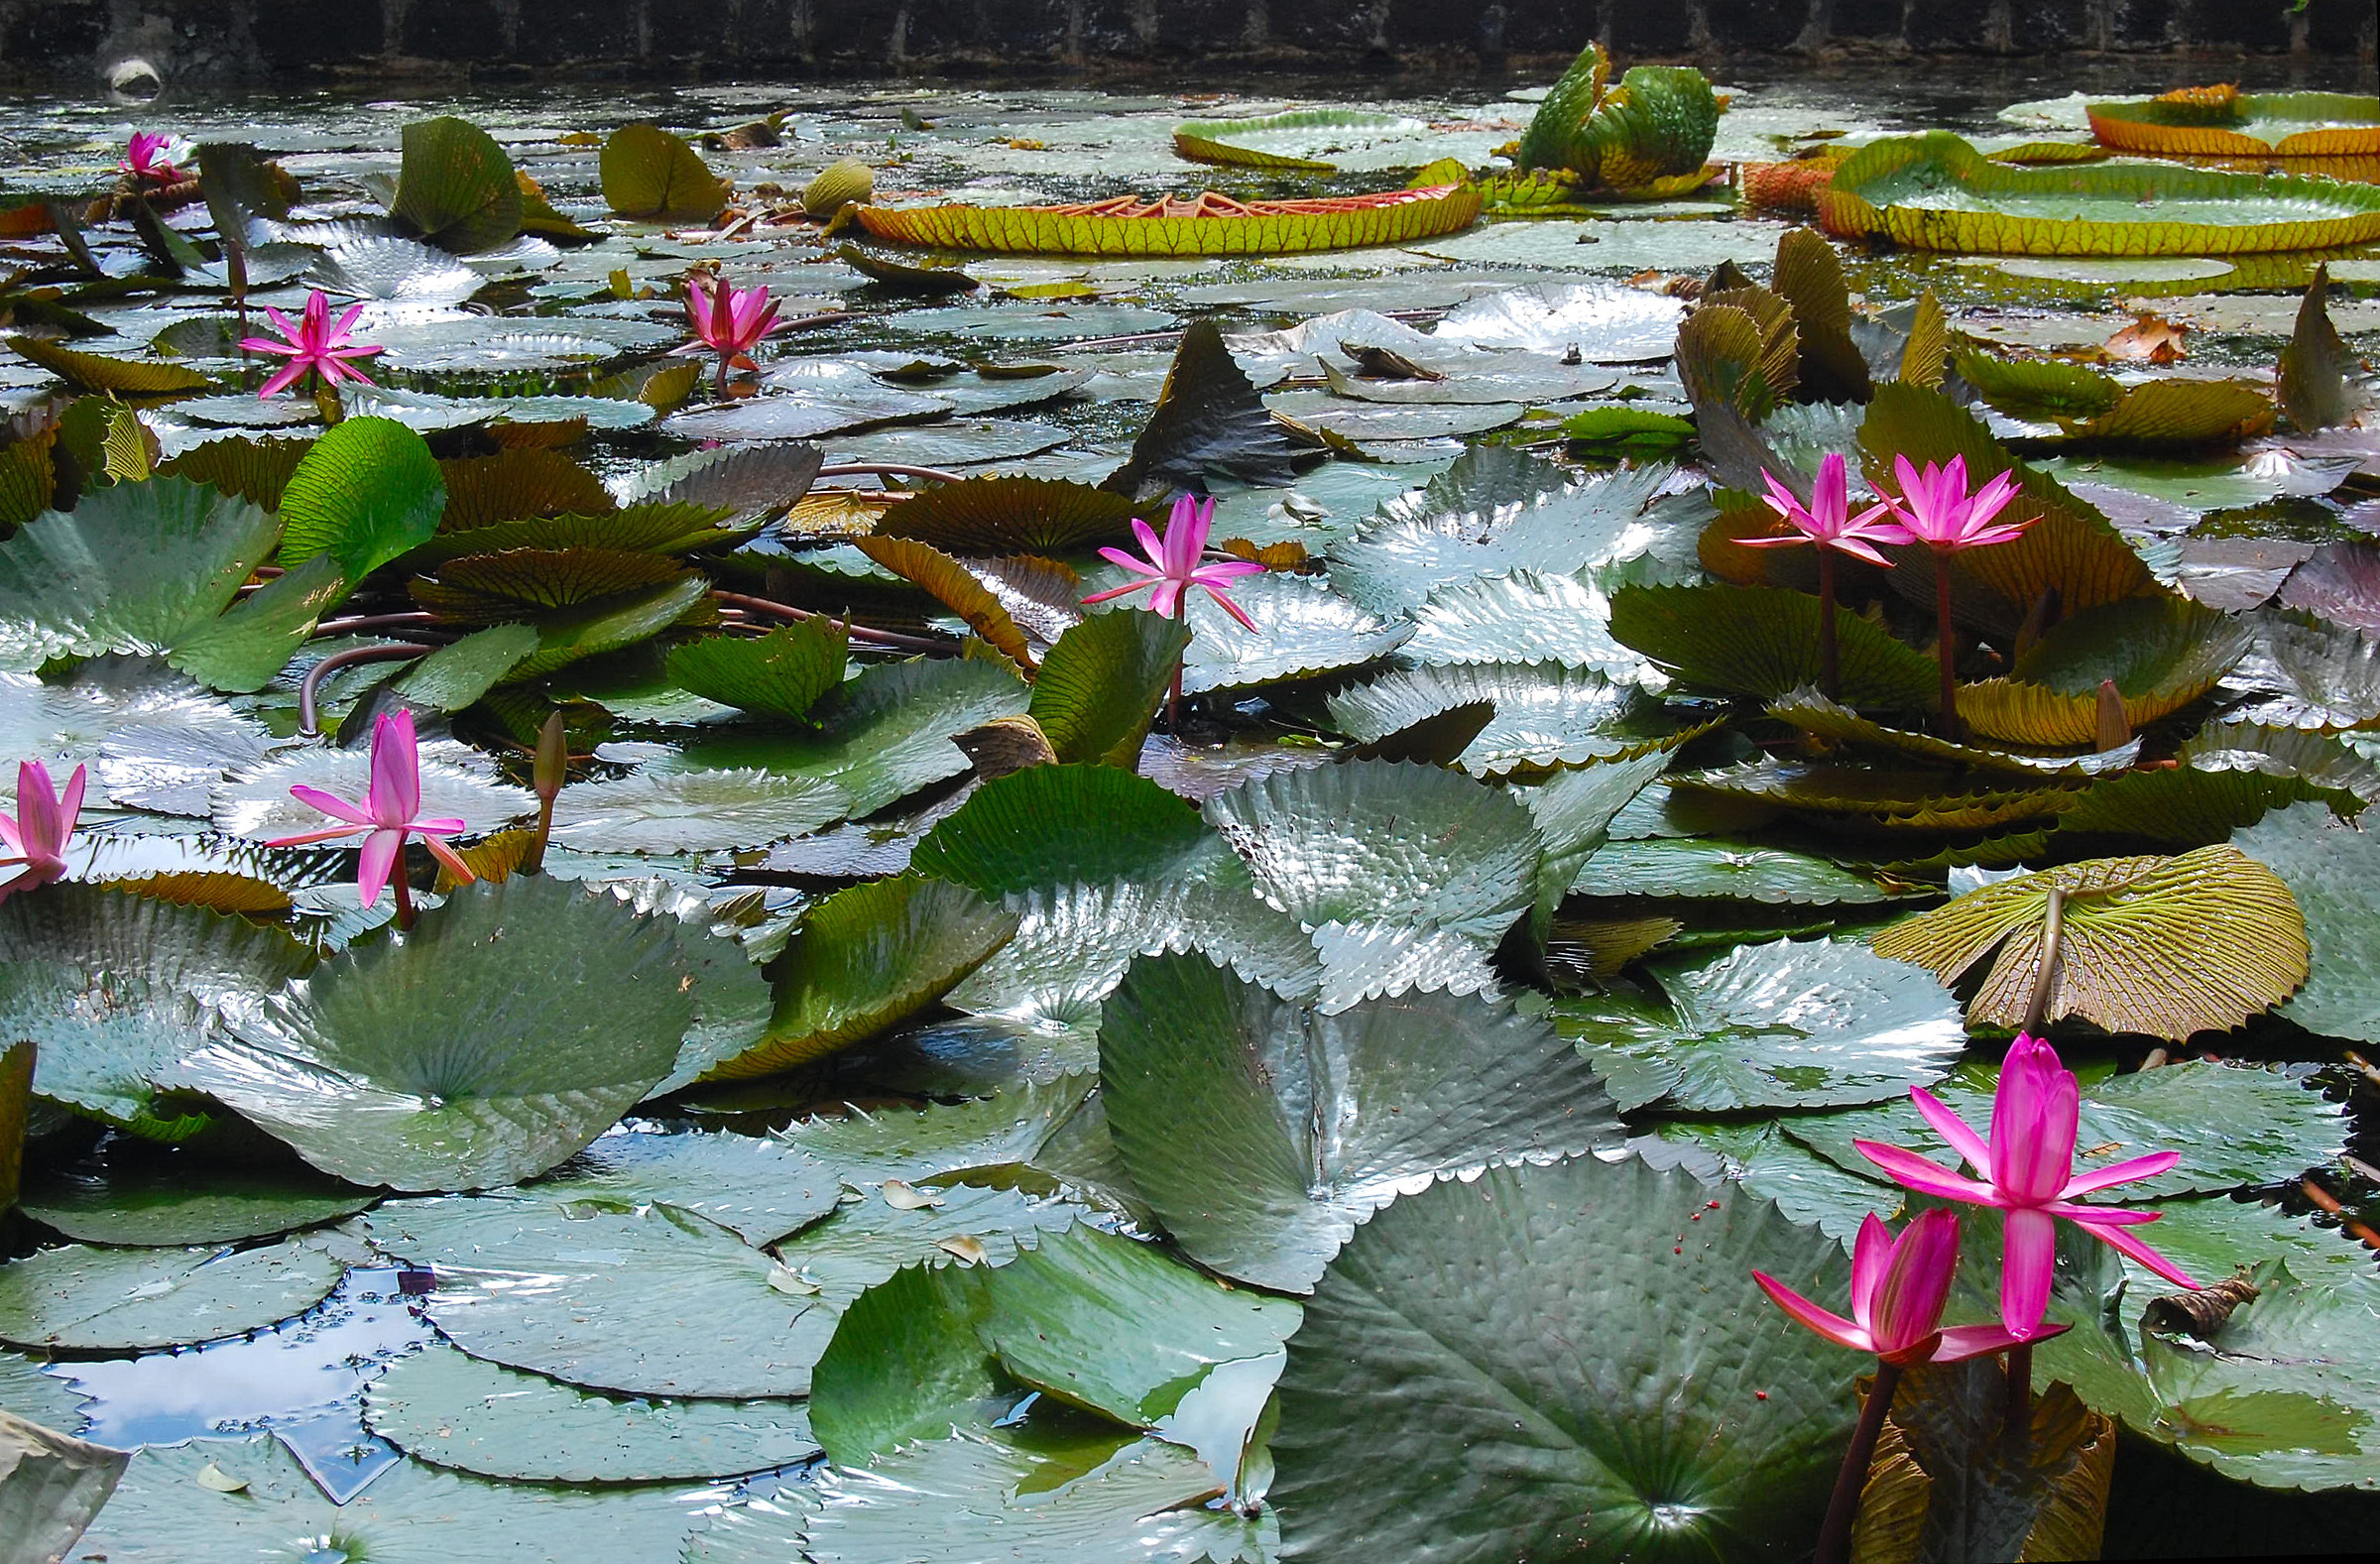 Pamplemousses (Mauritius): colors and reflections in the pond...